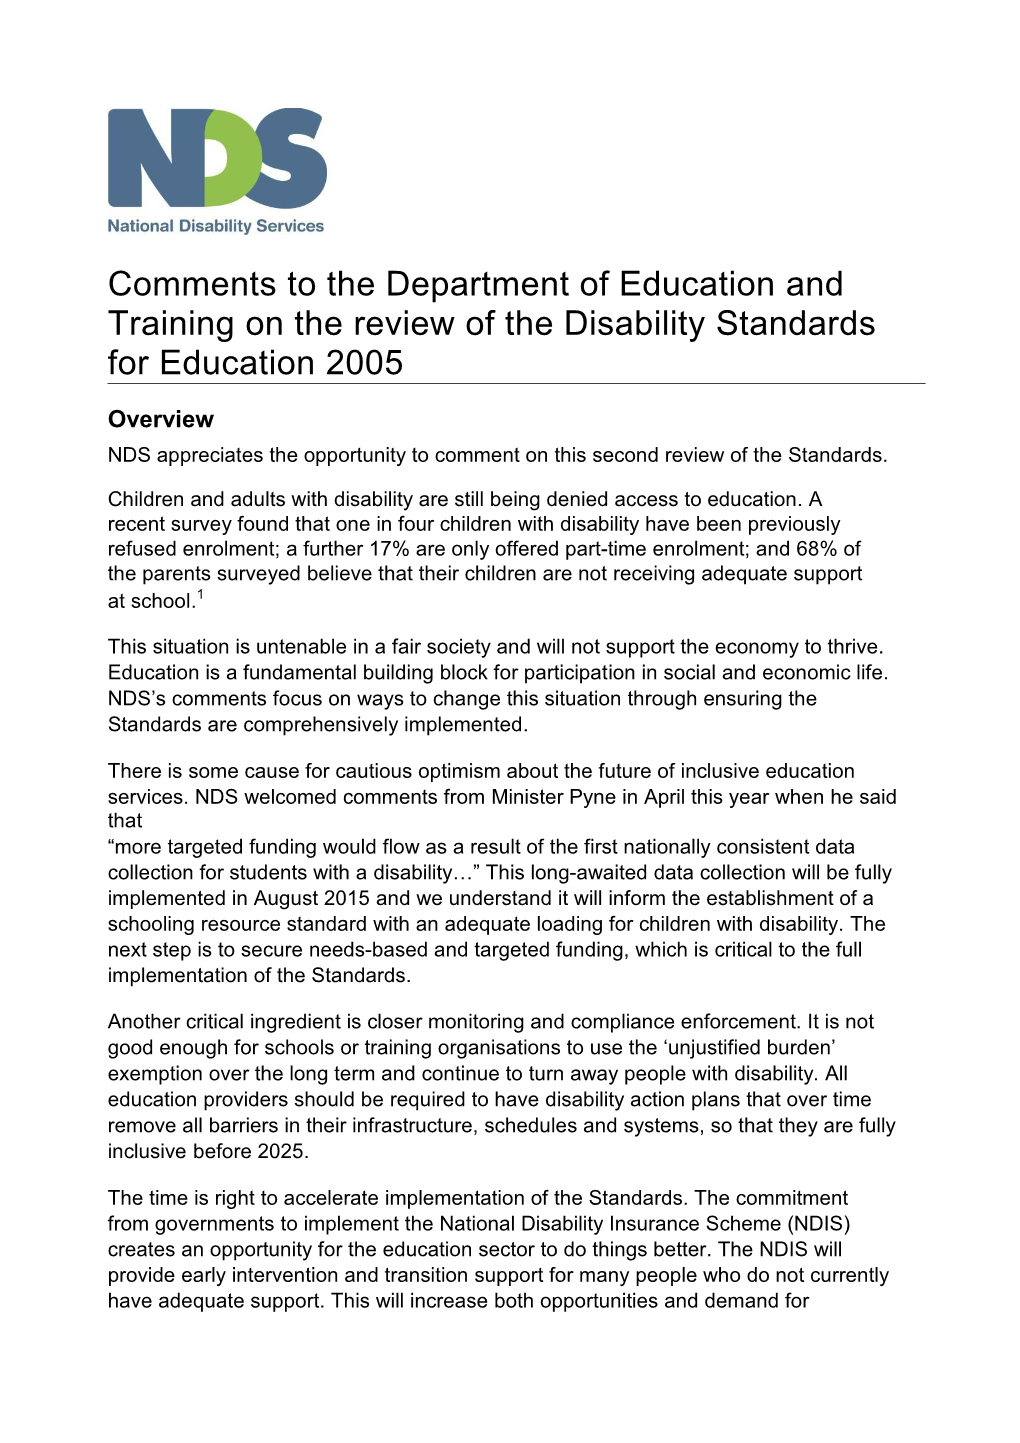 Comments to the Department of Education and Training on the Review of the Disability Standards